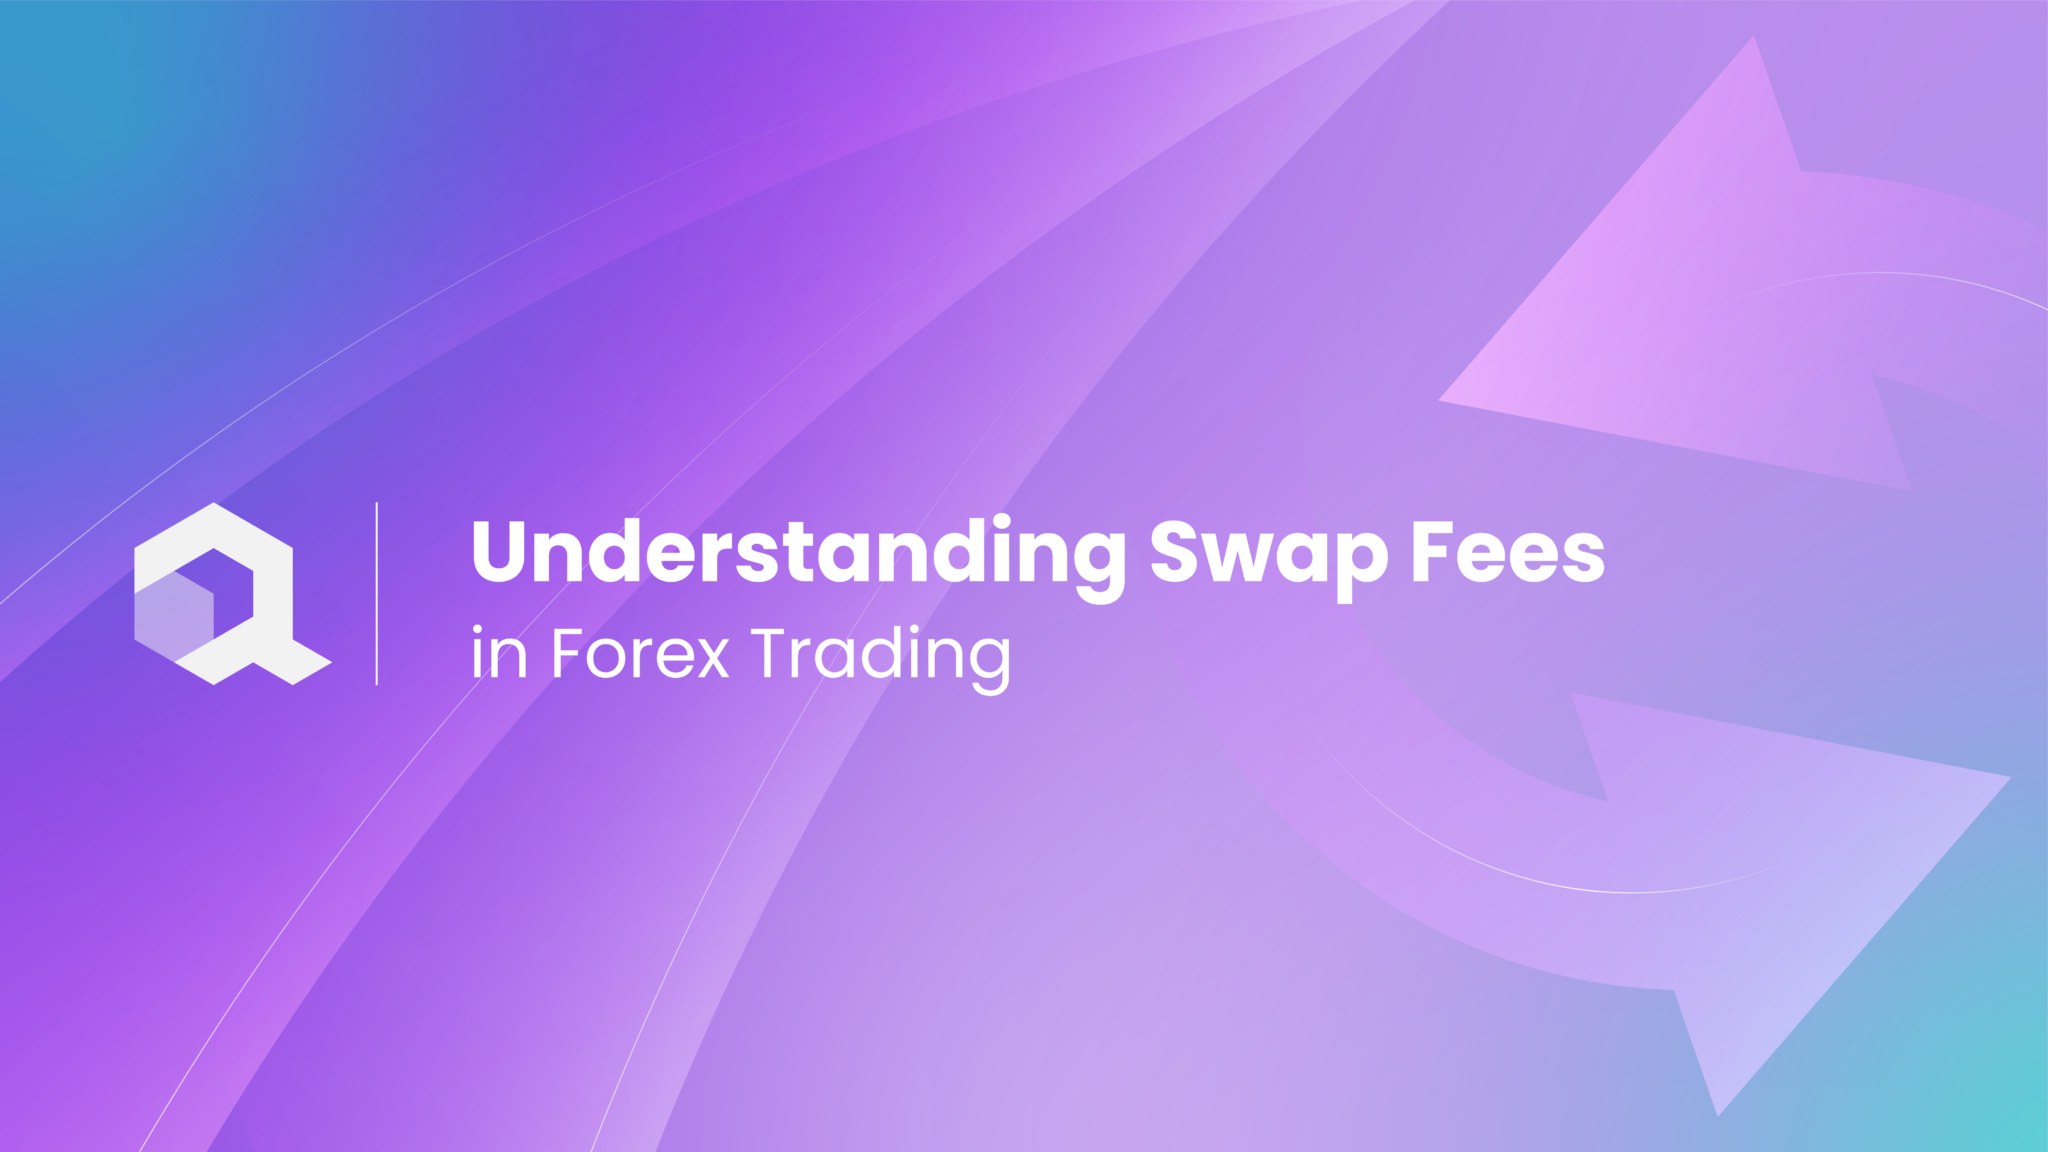 2 Multiple Perspectives on Swap Fees